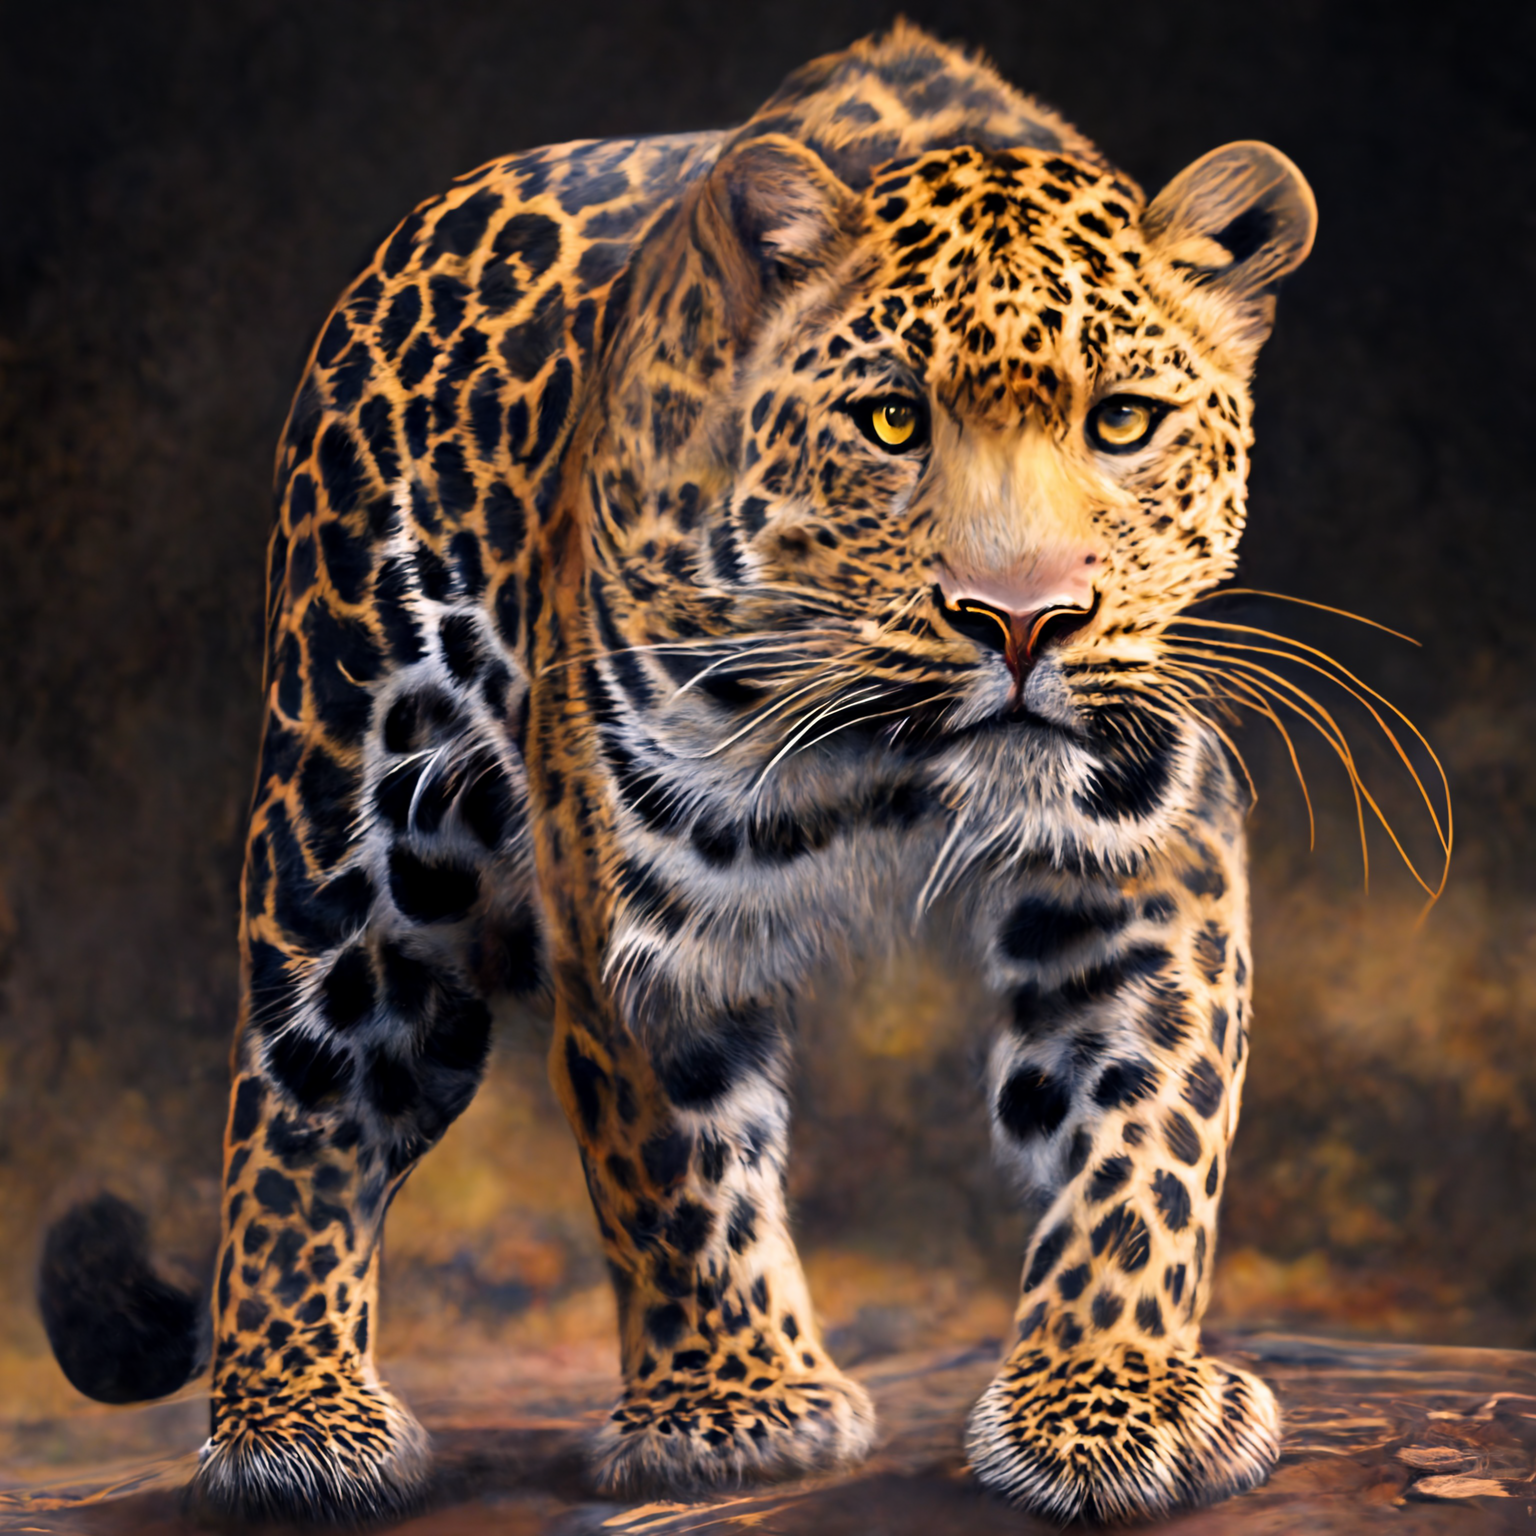 Amur leopard is big cats family member and  a critically endangered animal species